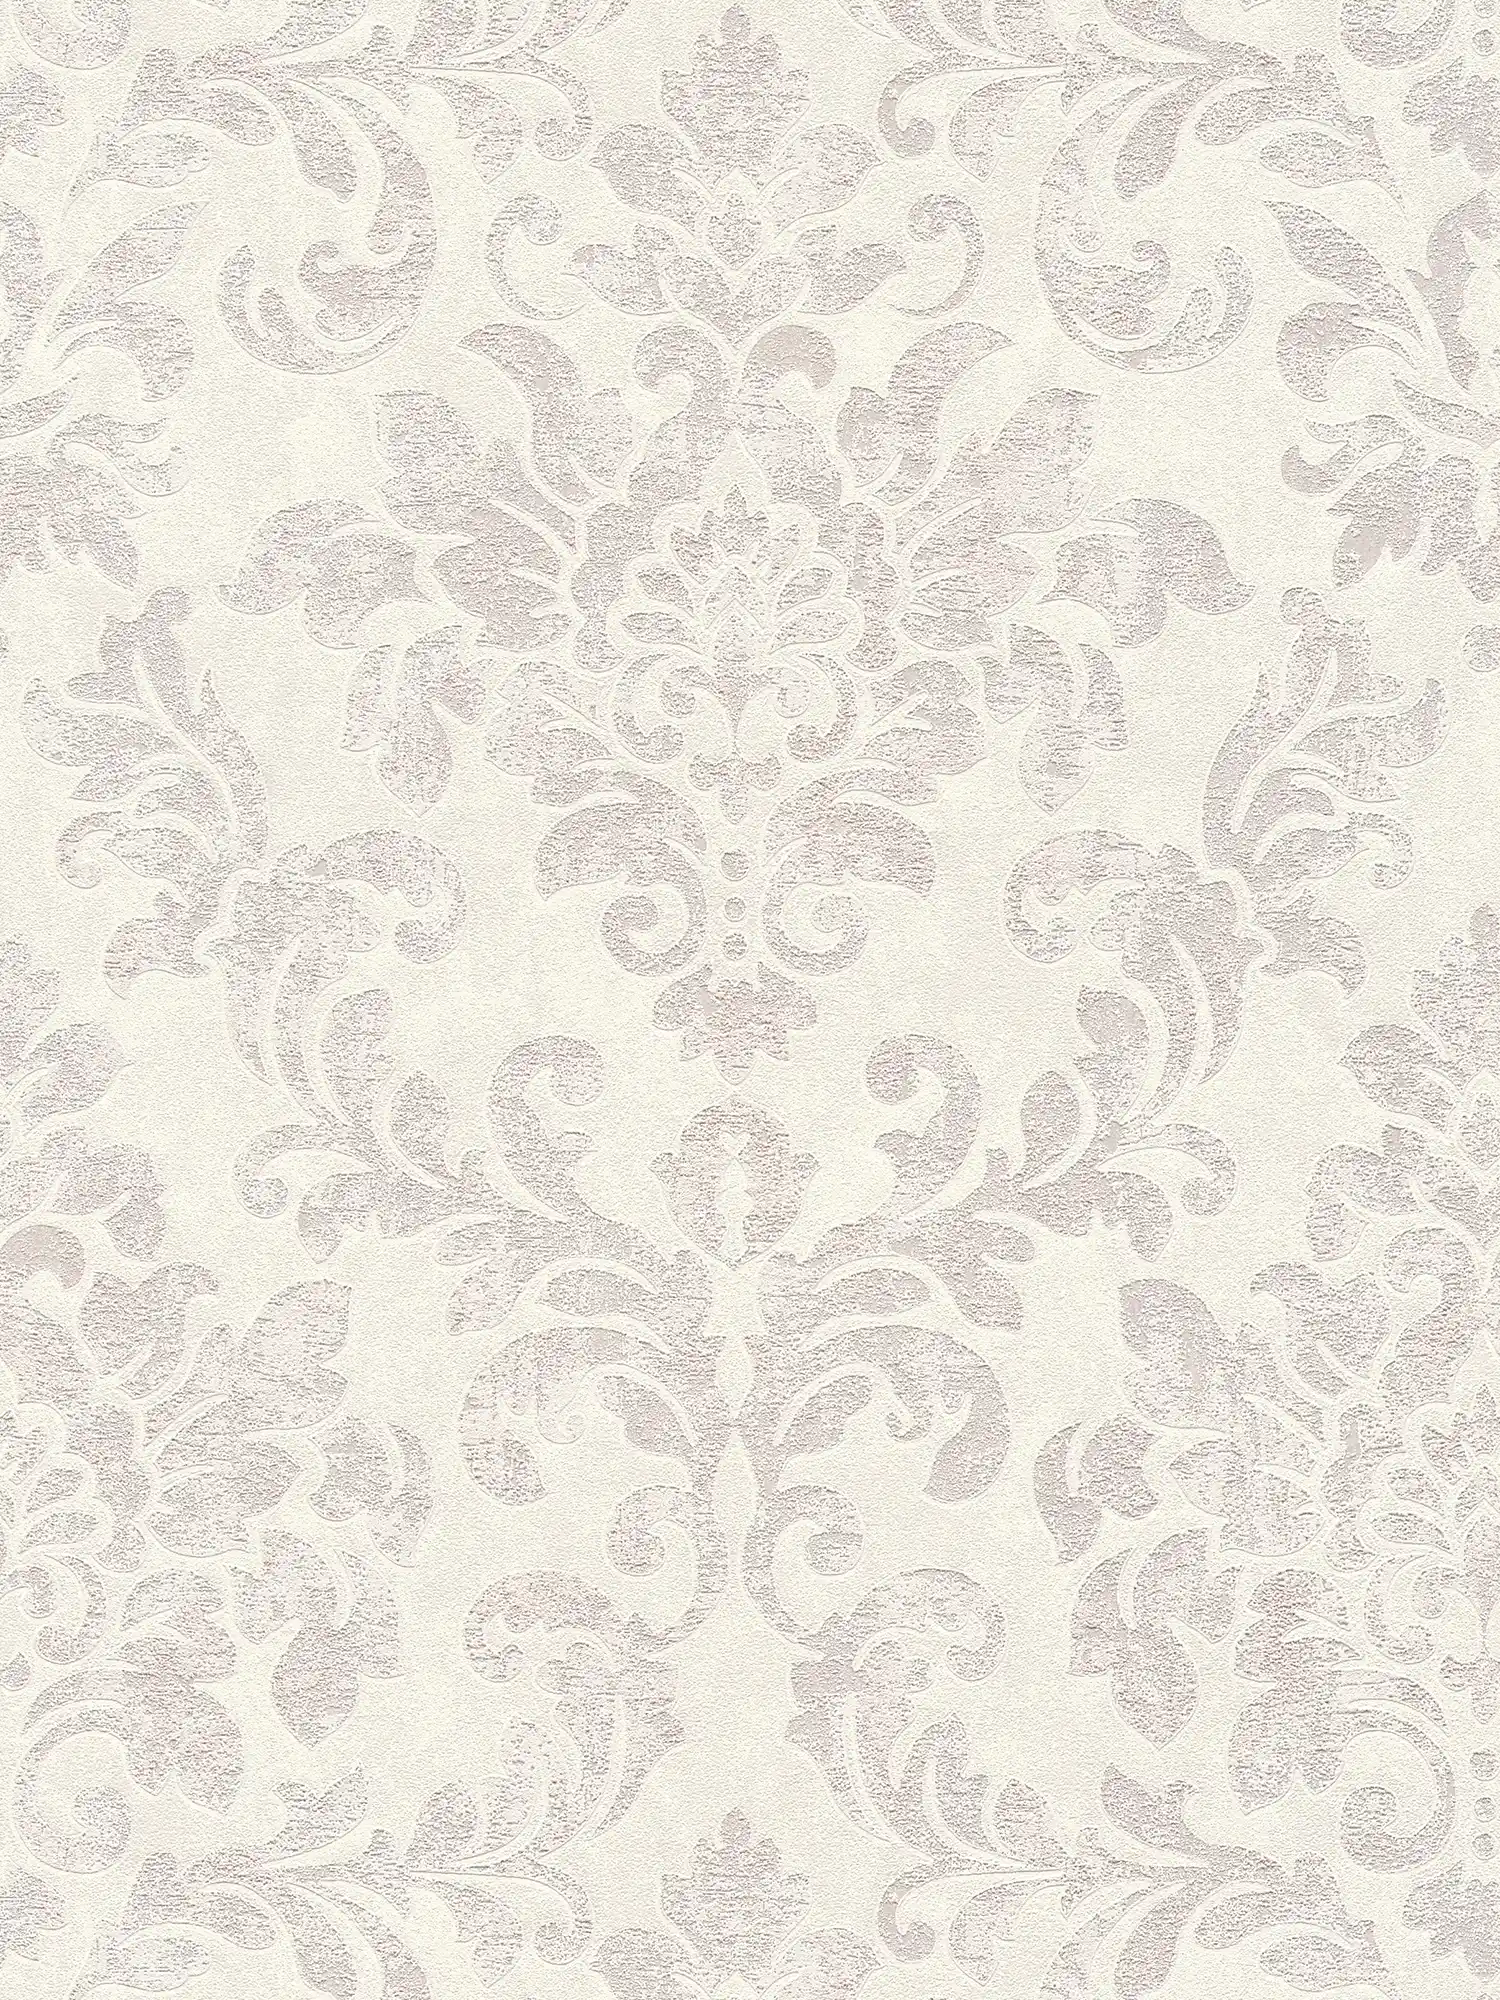 Baroque wallpaper ornaments in used look - white, grey, pink
